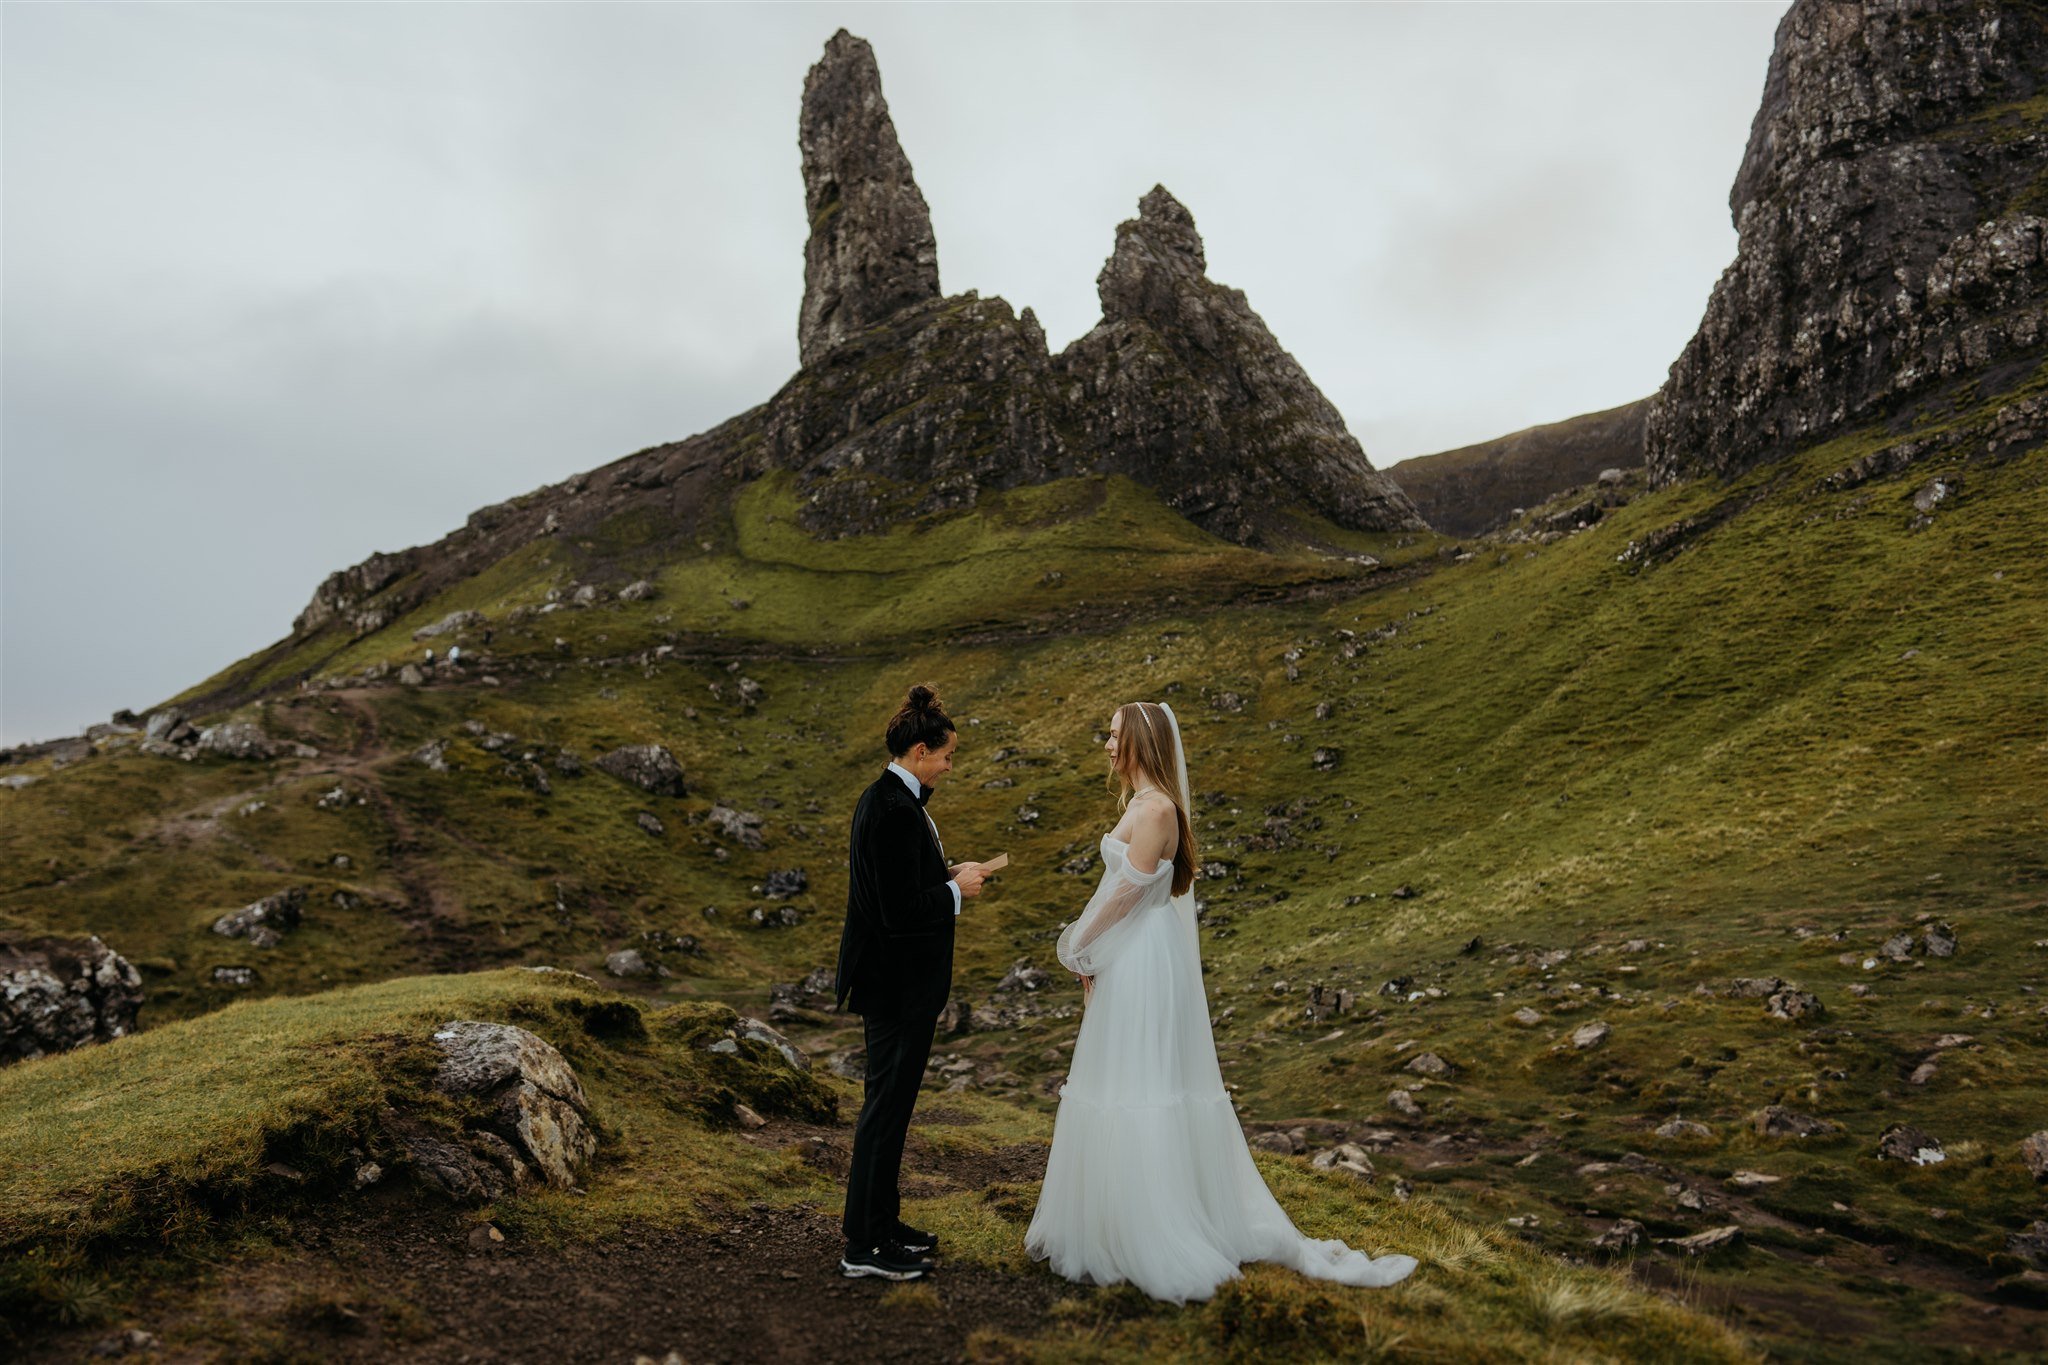 Brides read personal elopement vows while eloping on the Isle of Skye